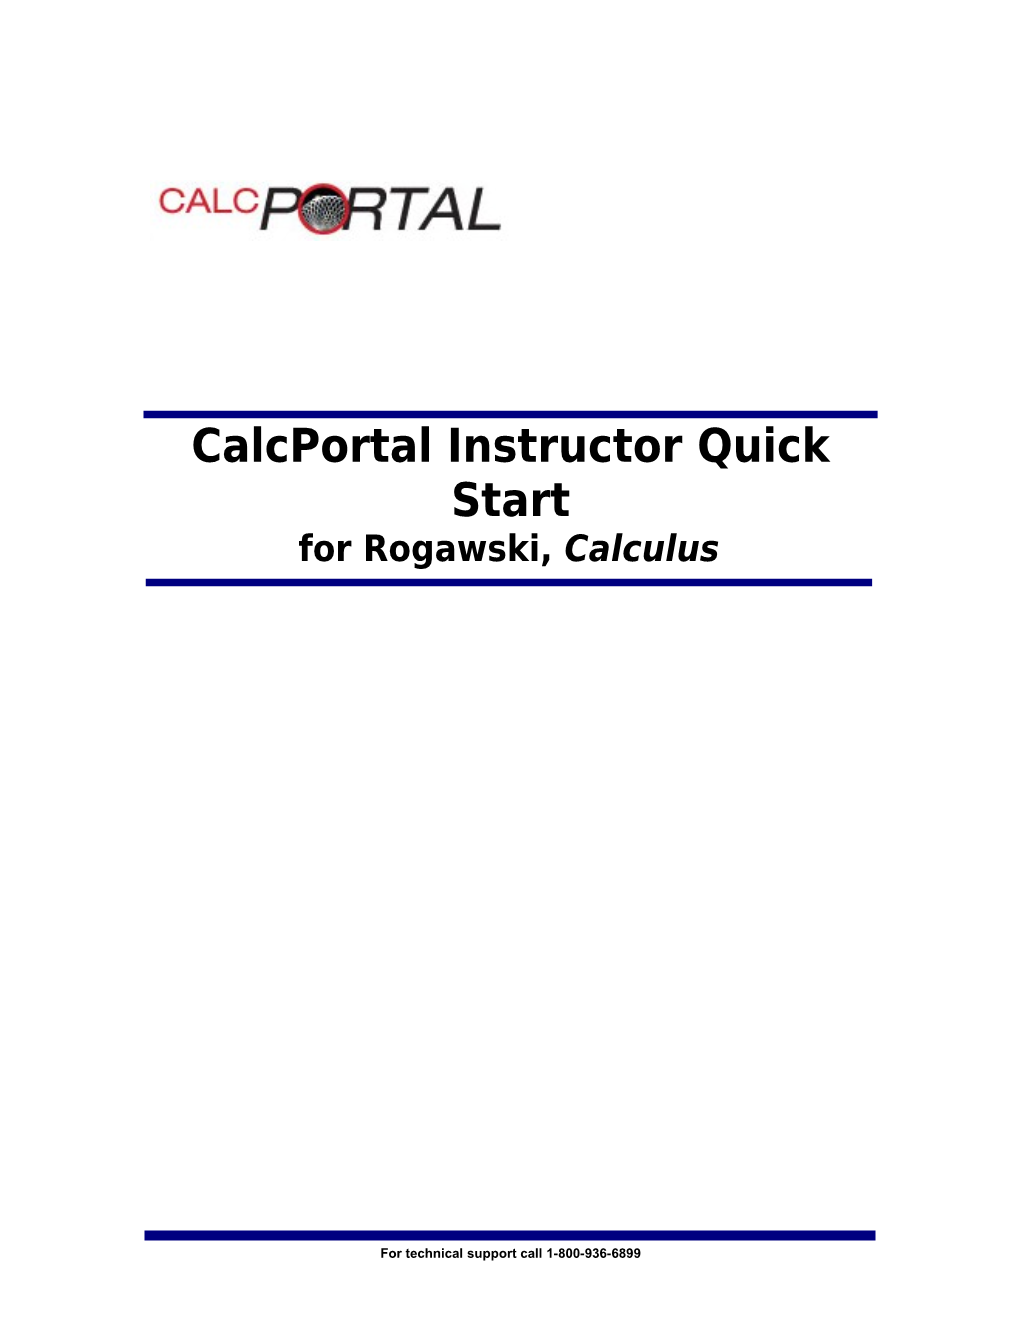 Calcportal Instructor Quick Start for Rogawski, Calculus